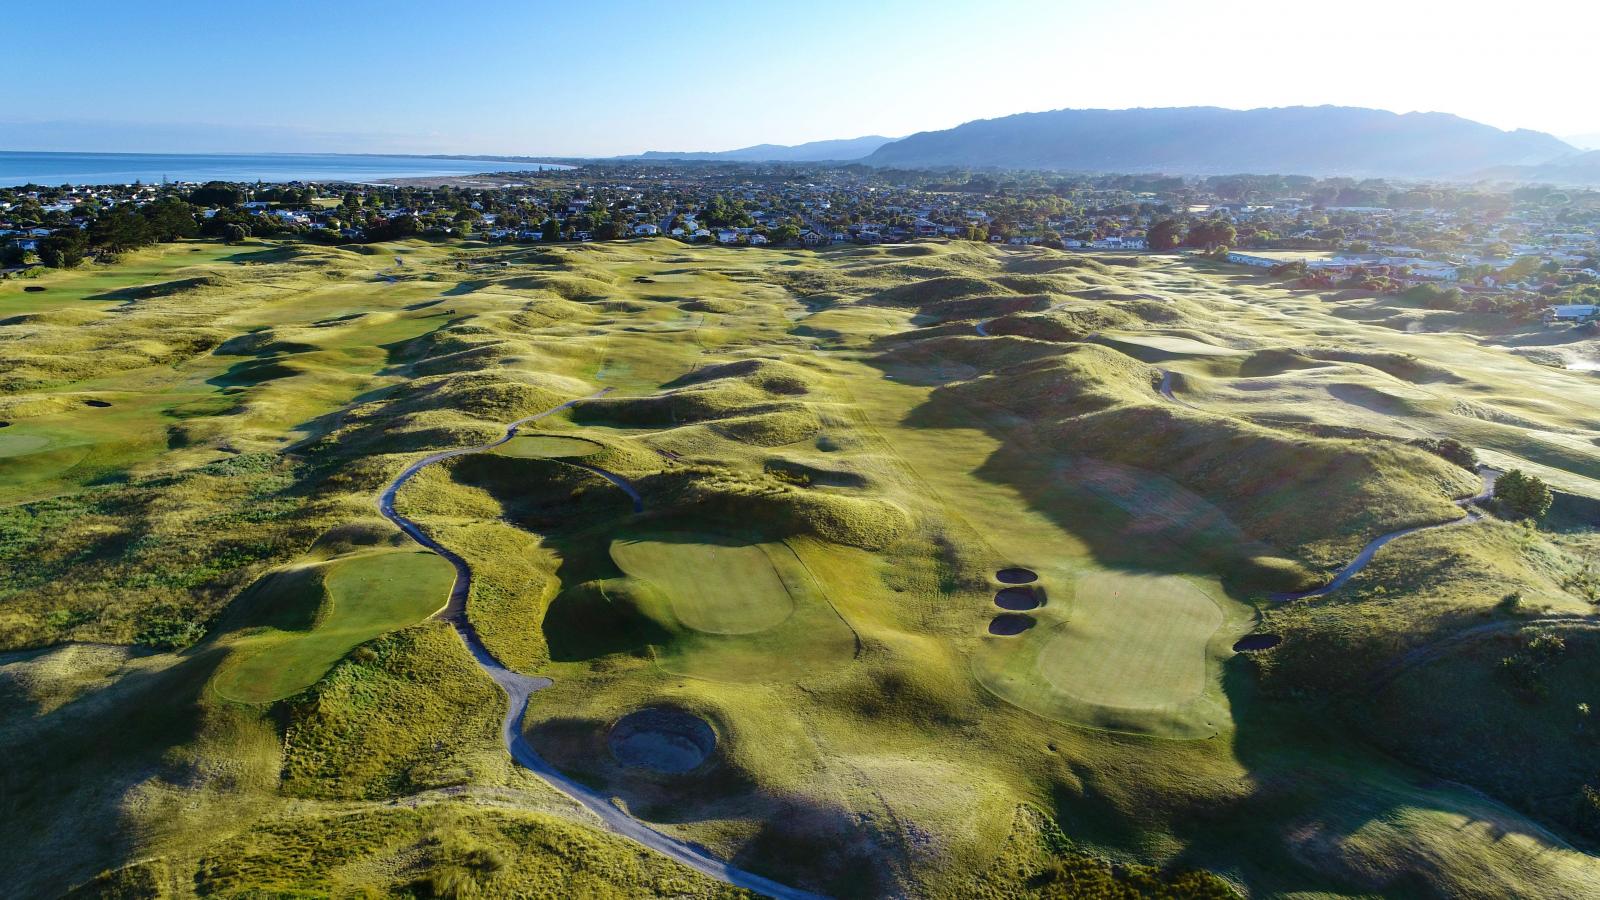 Aerial image of the golf links course and surrounding suburbs at Paraparaumu, New Zealand